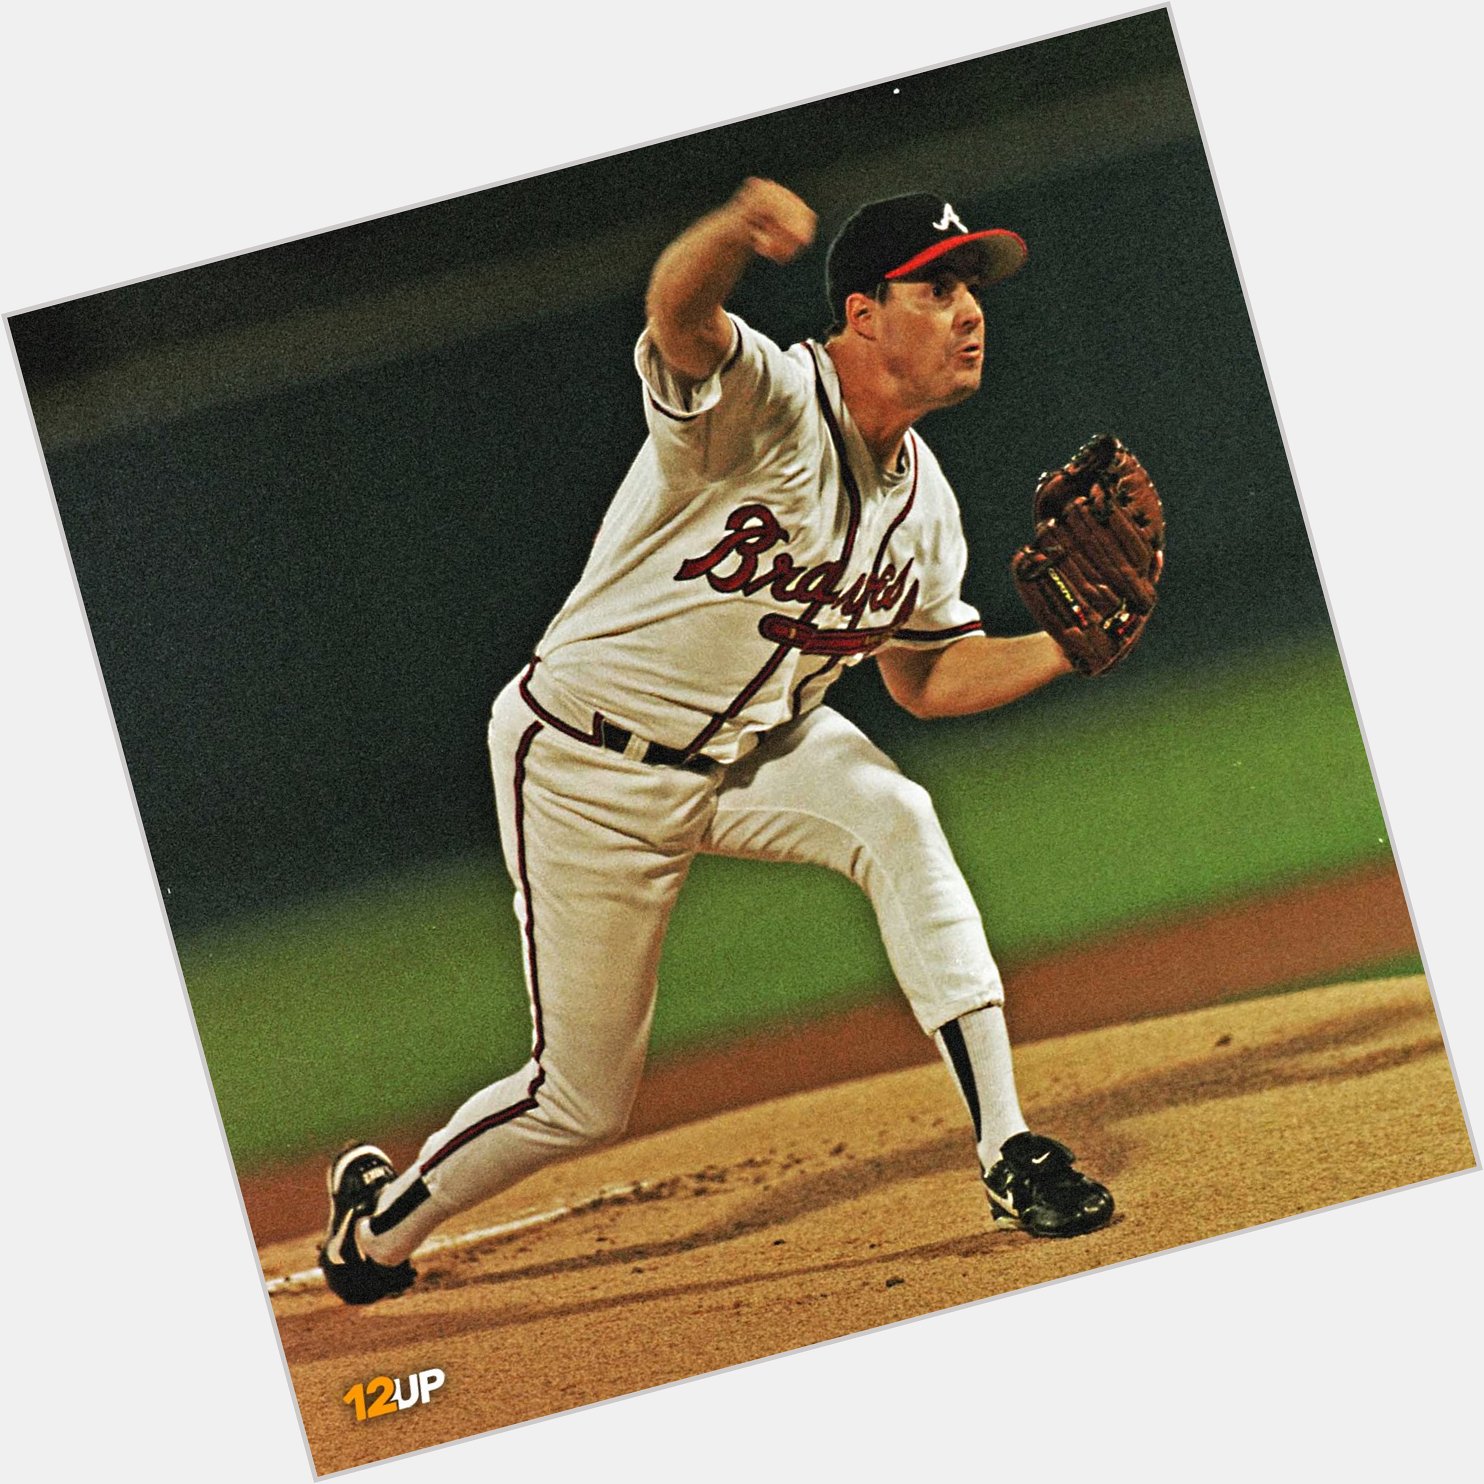 Happy birthday, Greg Maddux   One of the greatest and most overlooked pitchers of all-time.   